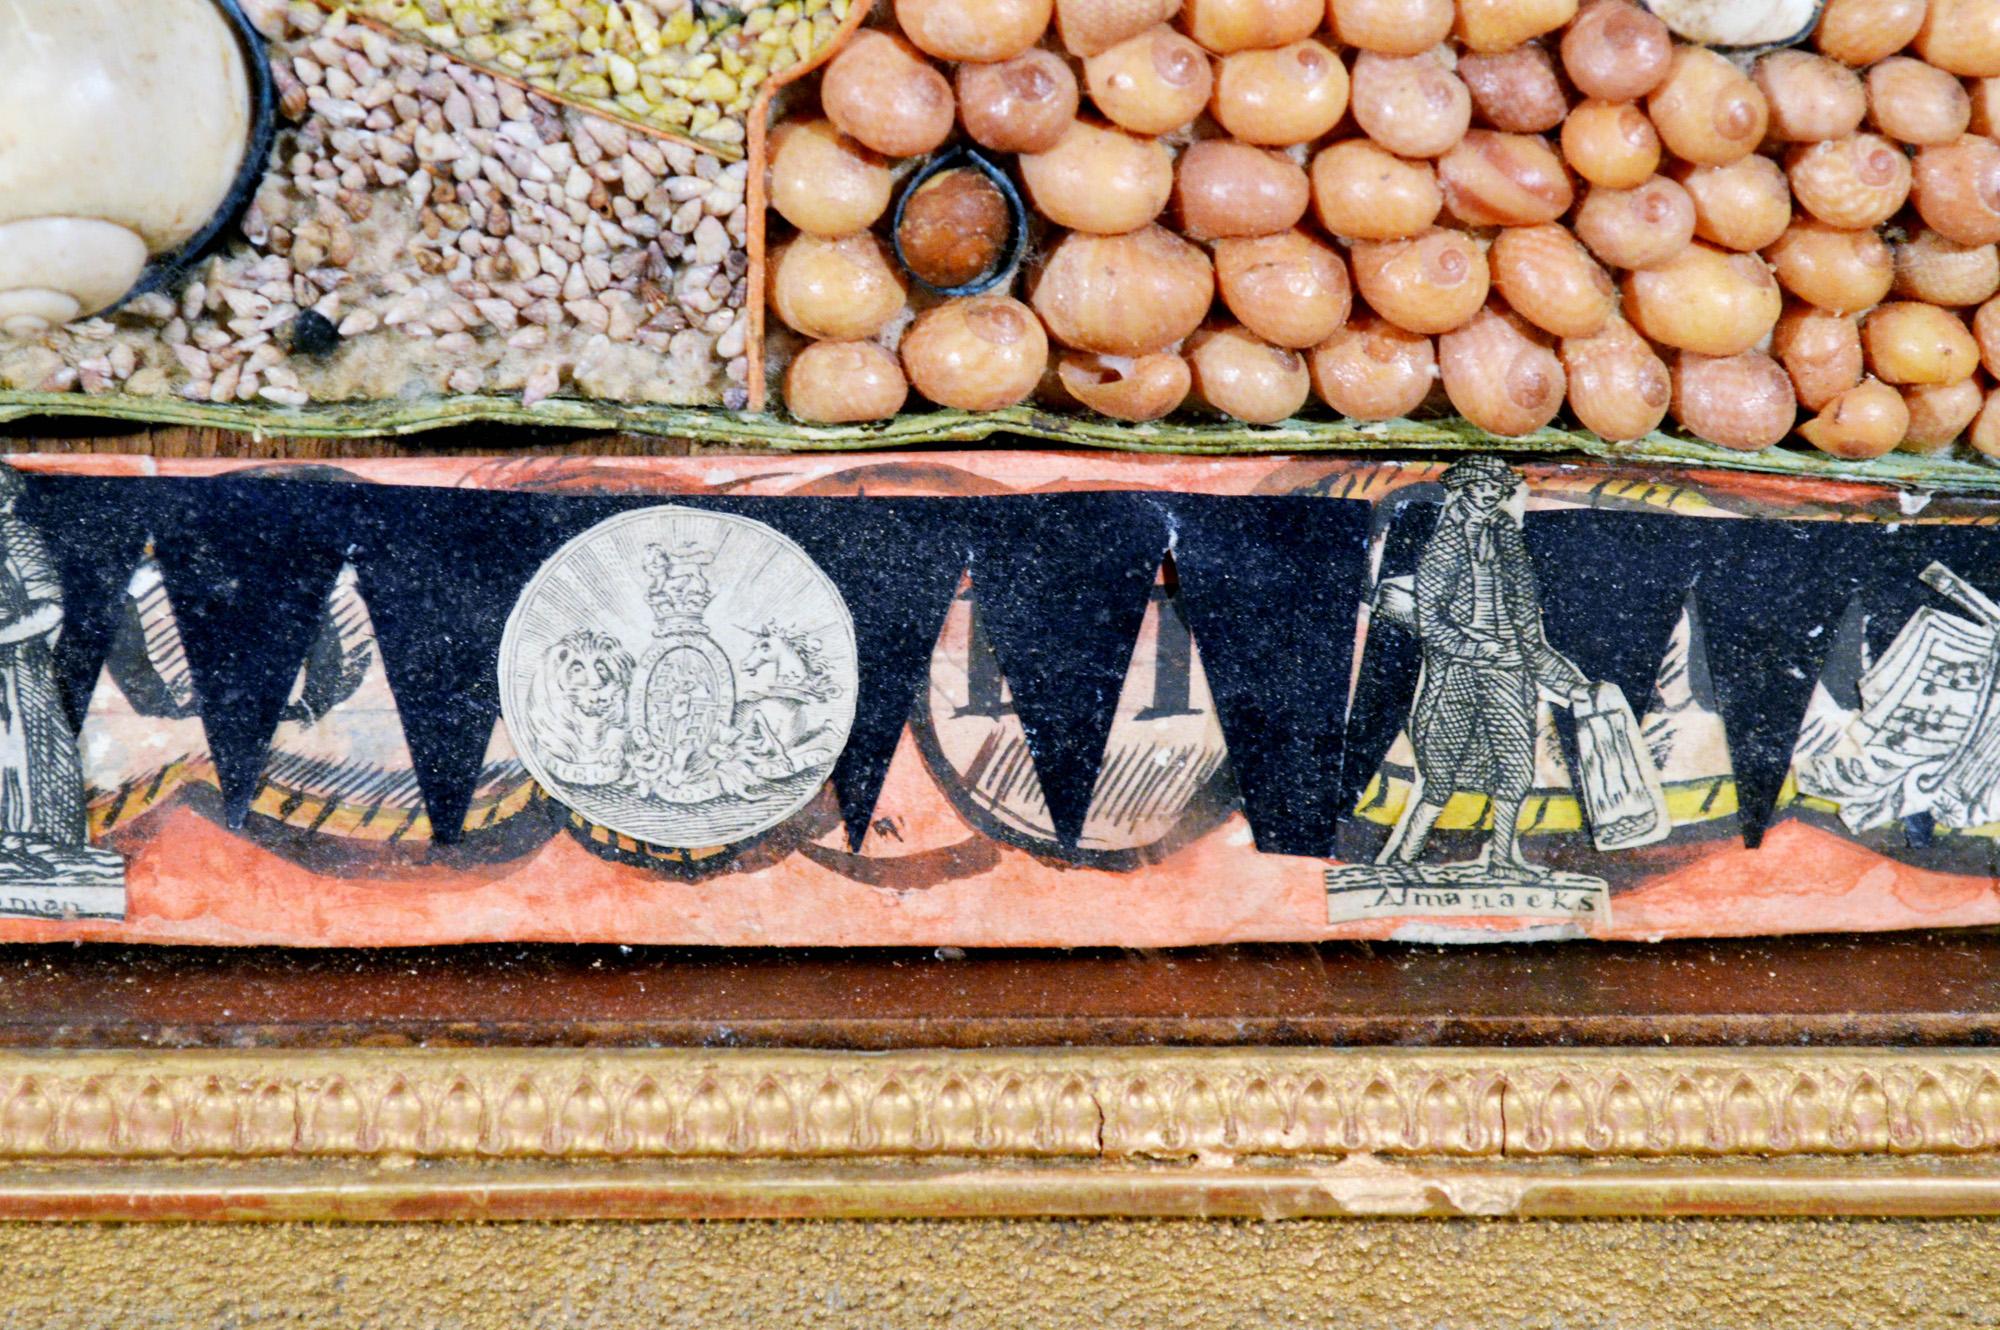 French Caribbean sea shell-work picture,
circa 1820-1840.

The superb early 19th-century rectangular picture with a central reserve depicting naval objects including flags, drums, anchors, medals, and cannon and created with tiny shell seeds. The